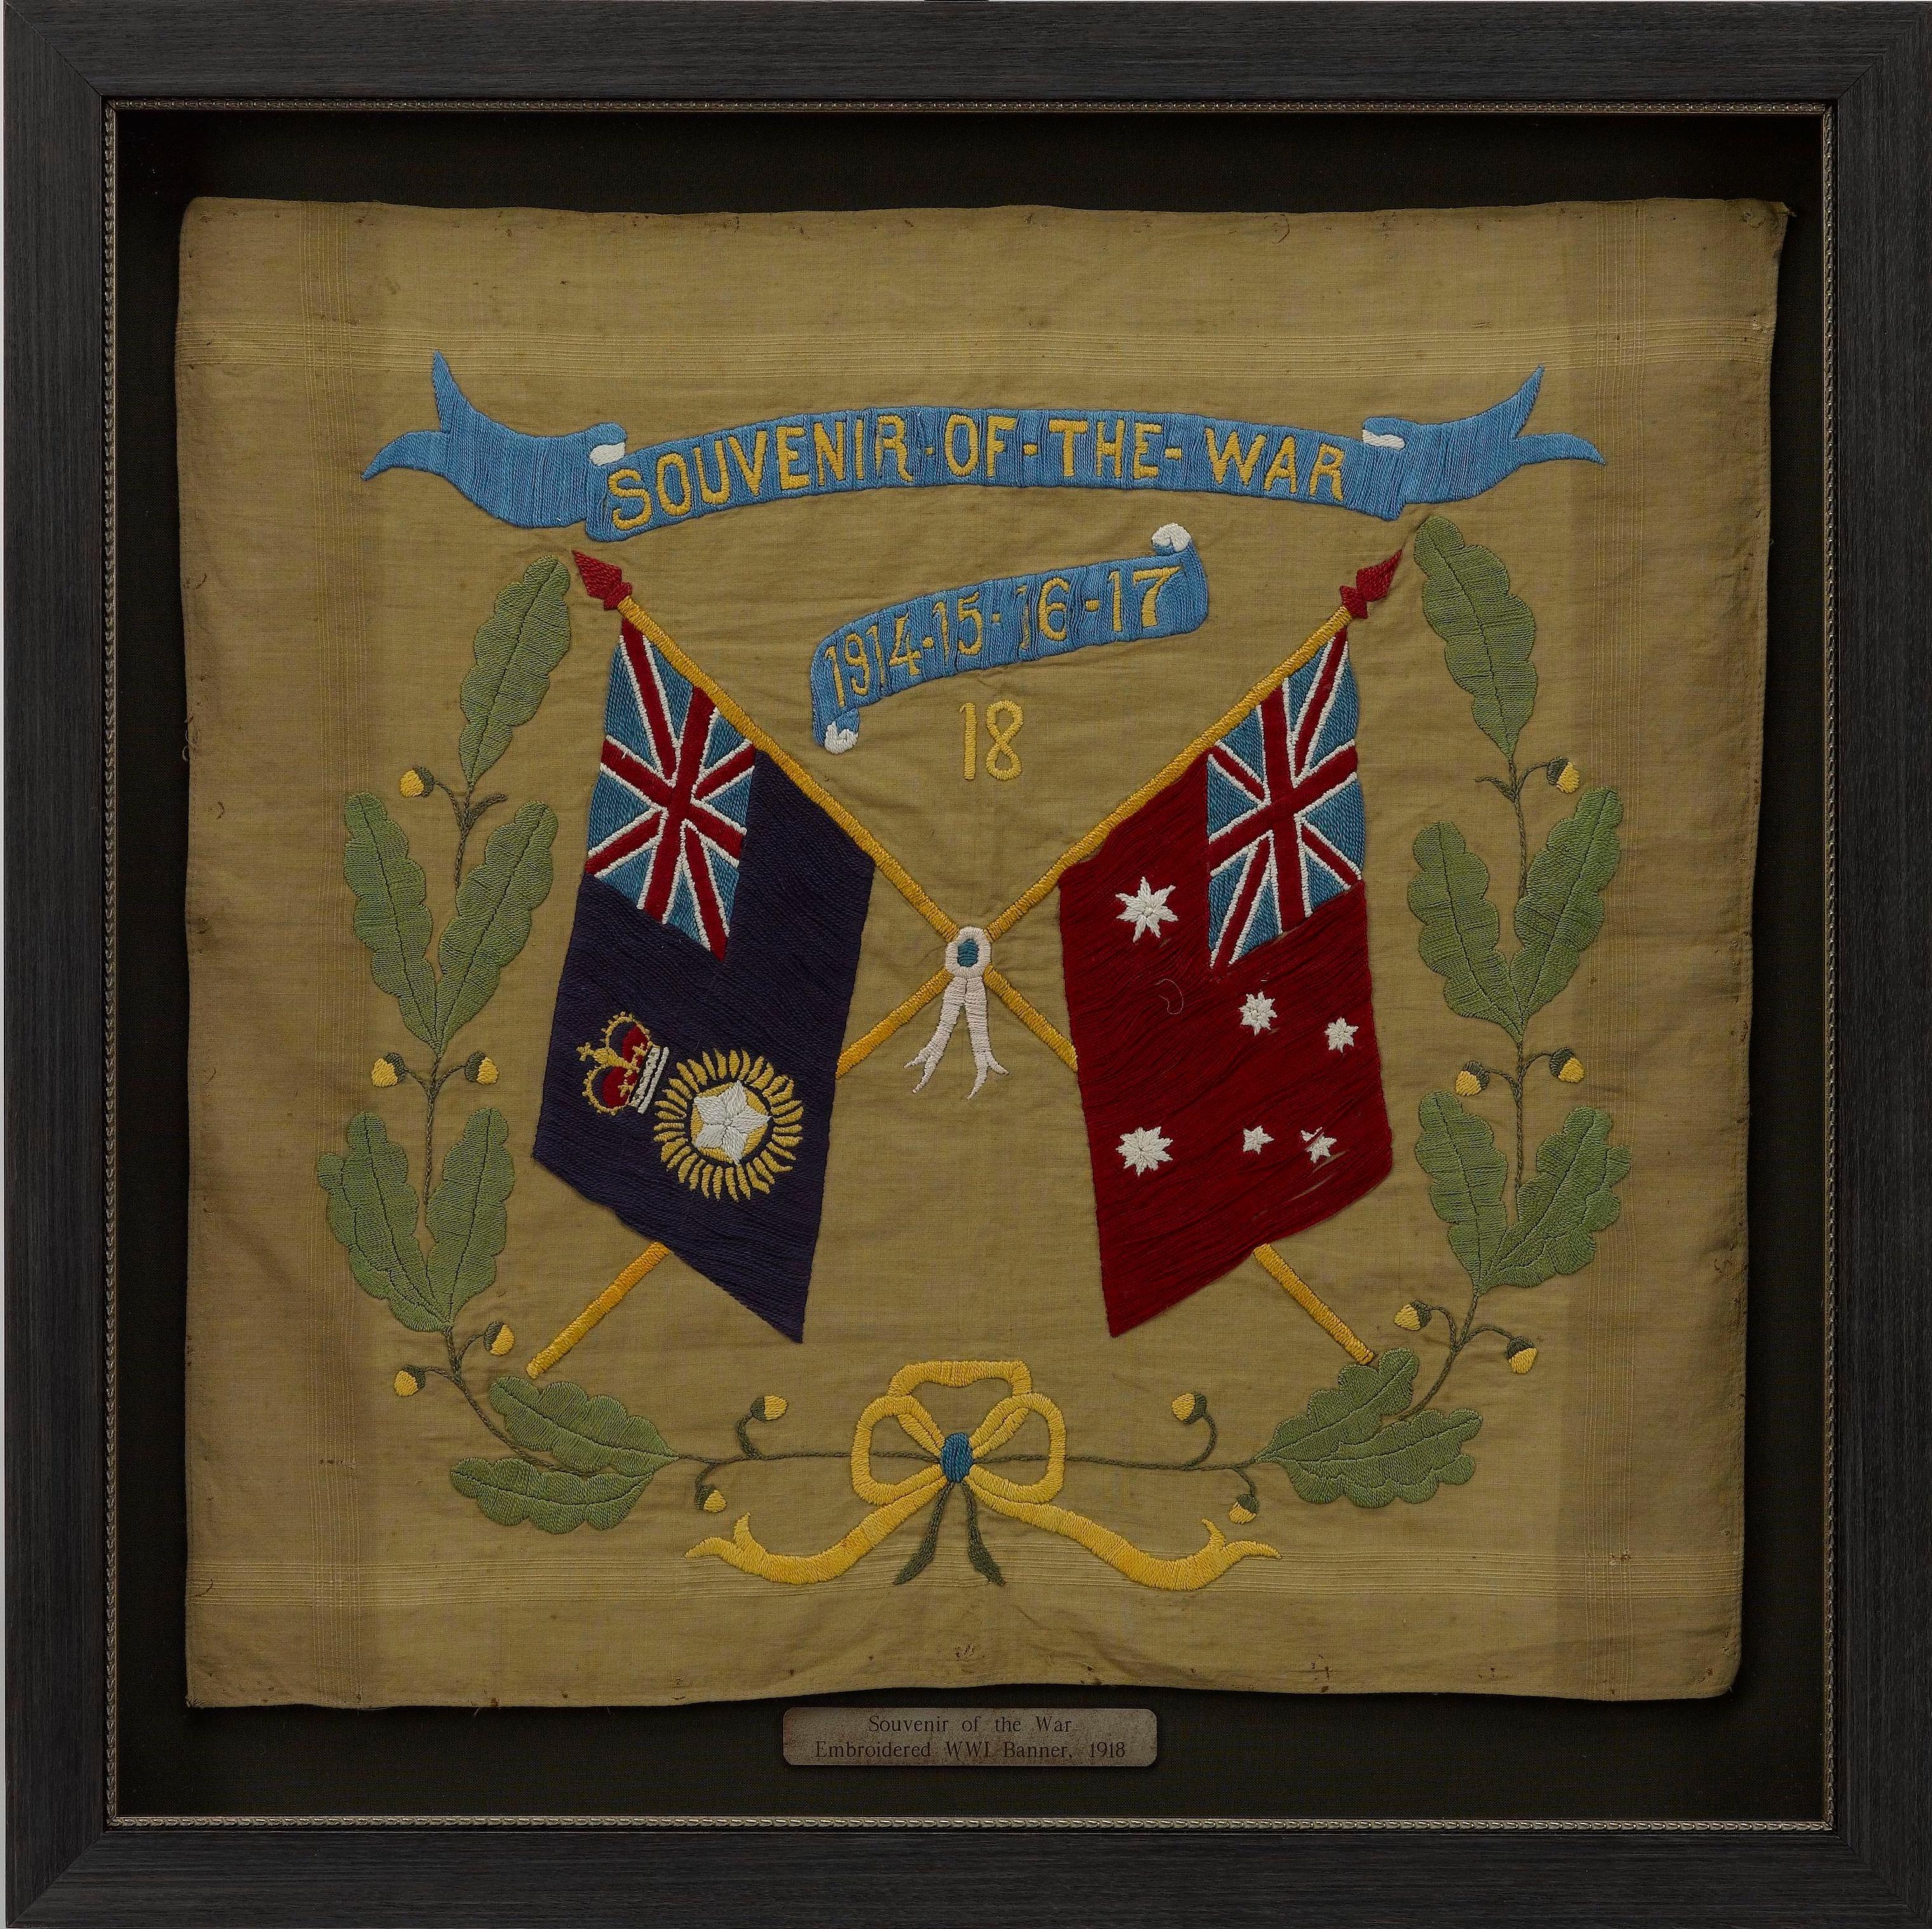 Presented is a stunning textile banner from the first World War, dating to 1918. The square tan cotton cloth is embroidered with two crossed flags, the Royal Indian Marine Ensign and the Australian Civil Ensign, and celebrates both Navies' service